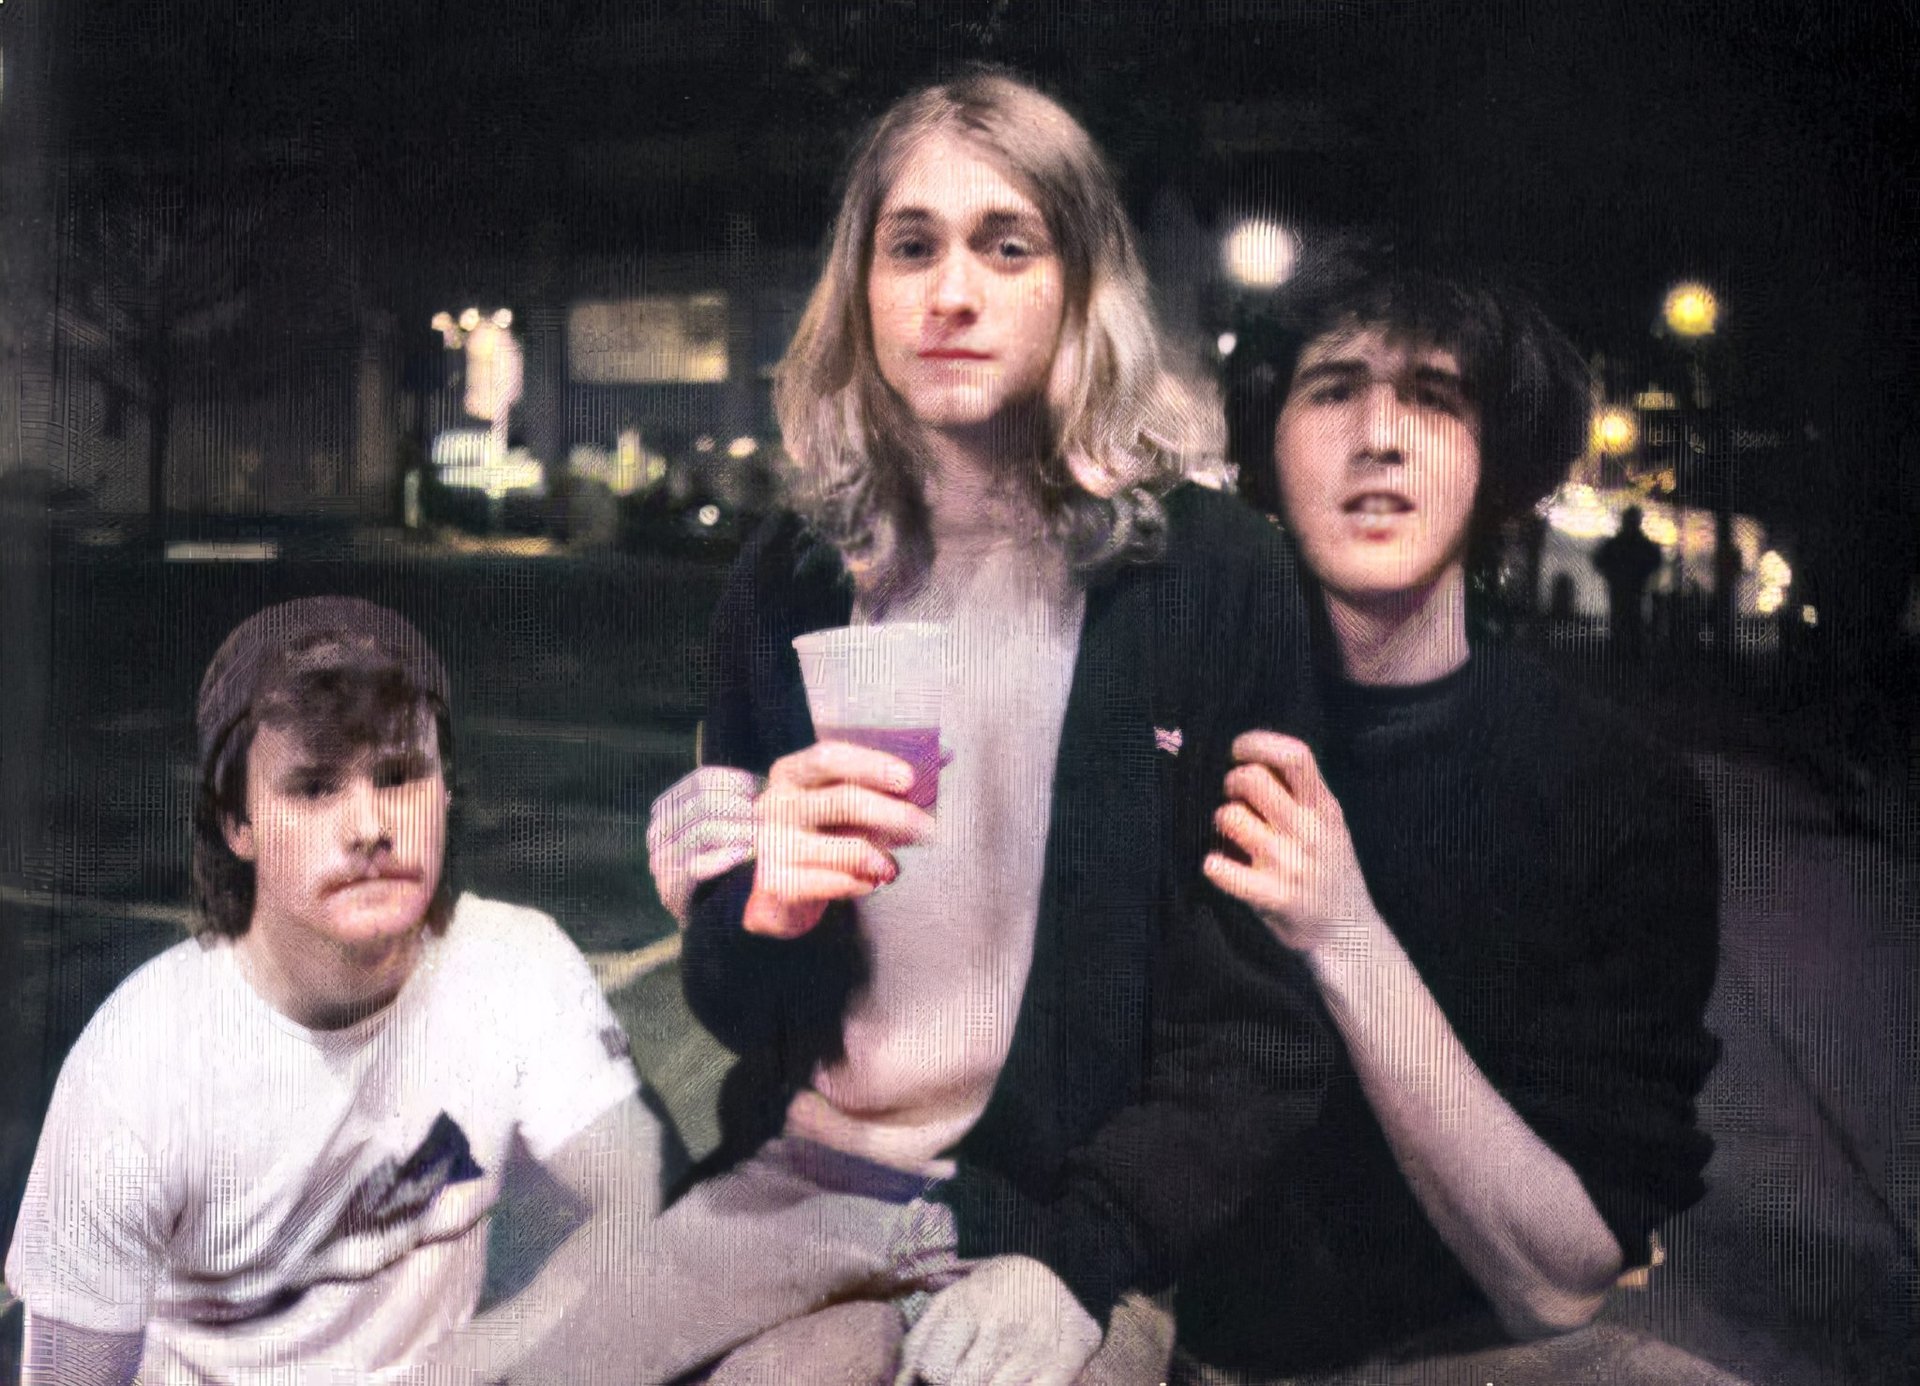 Photos of Nirvana before they took over the world